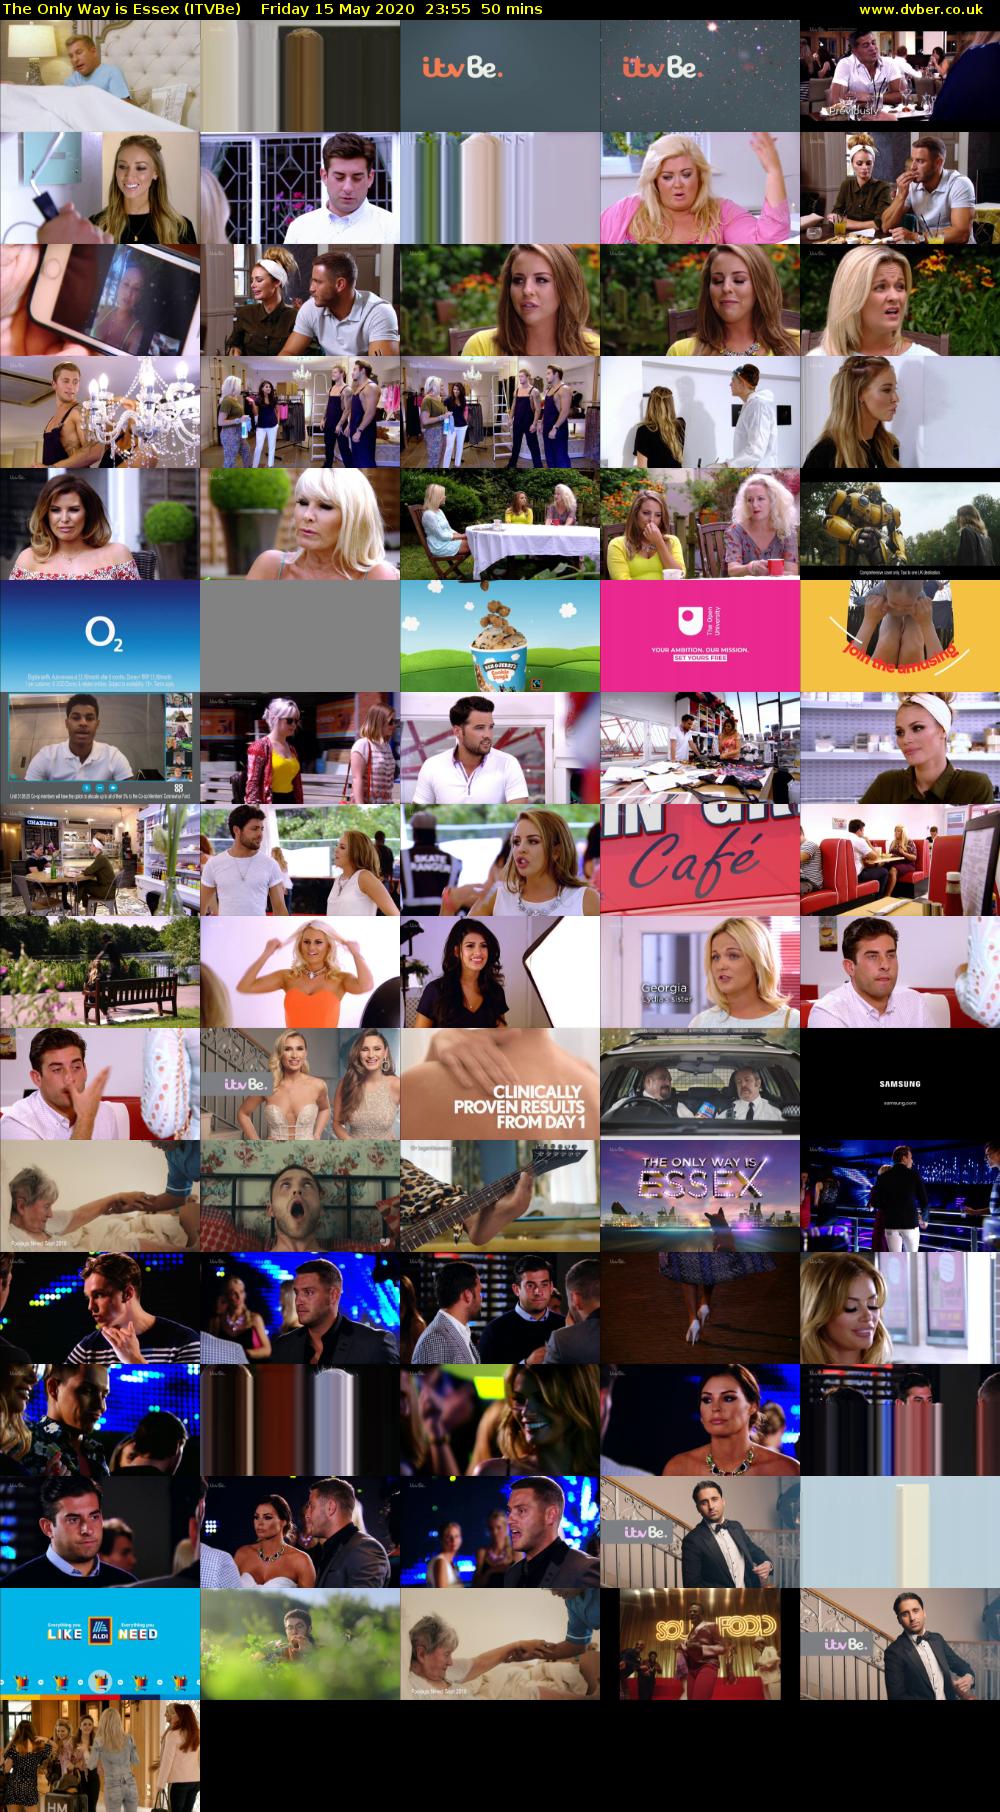 The Only Way is Essex (ITVBe) Friday 15 May 2020 23:55 - 00:45